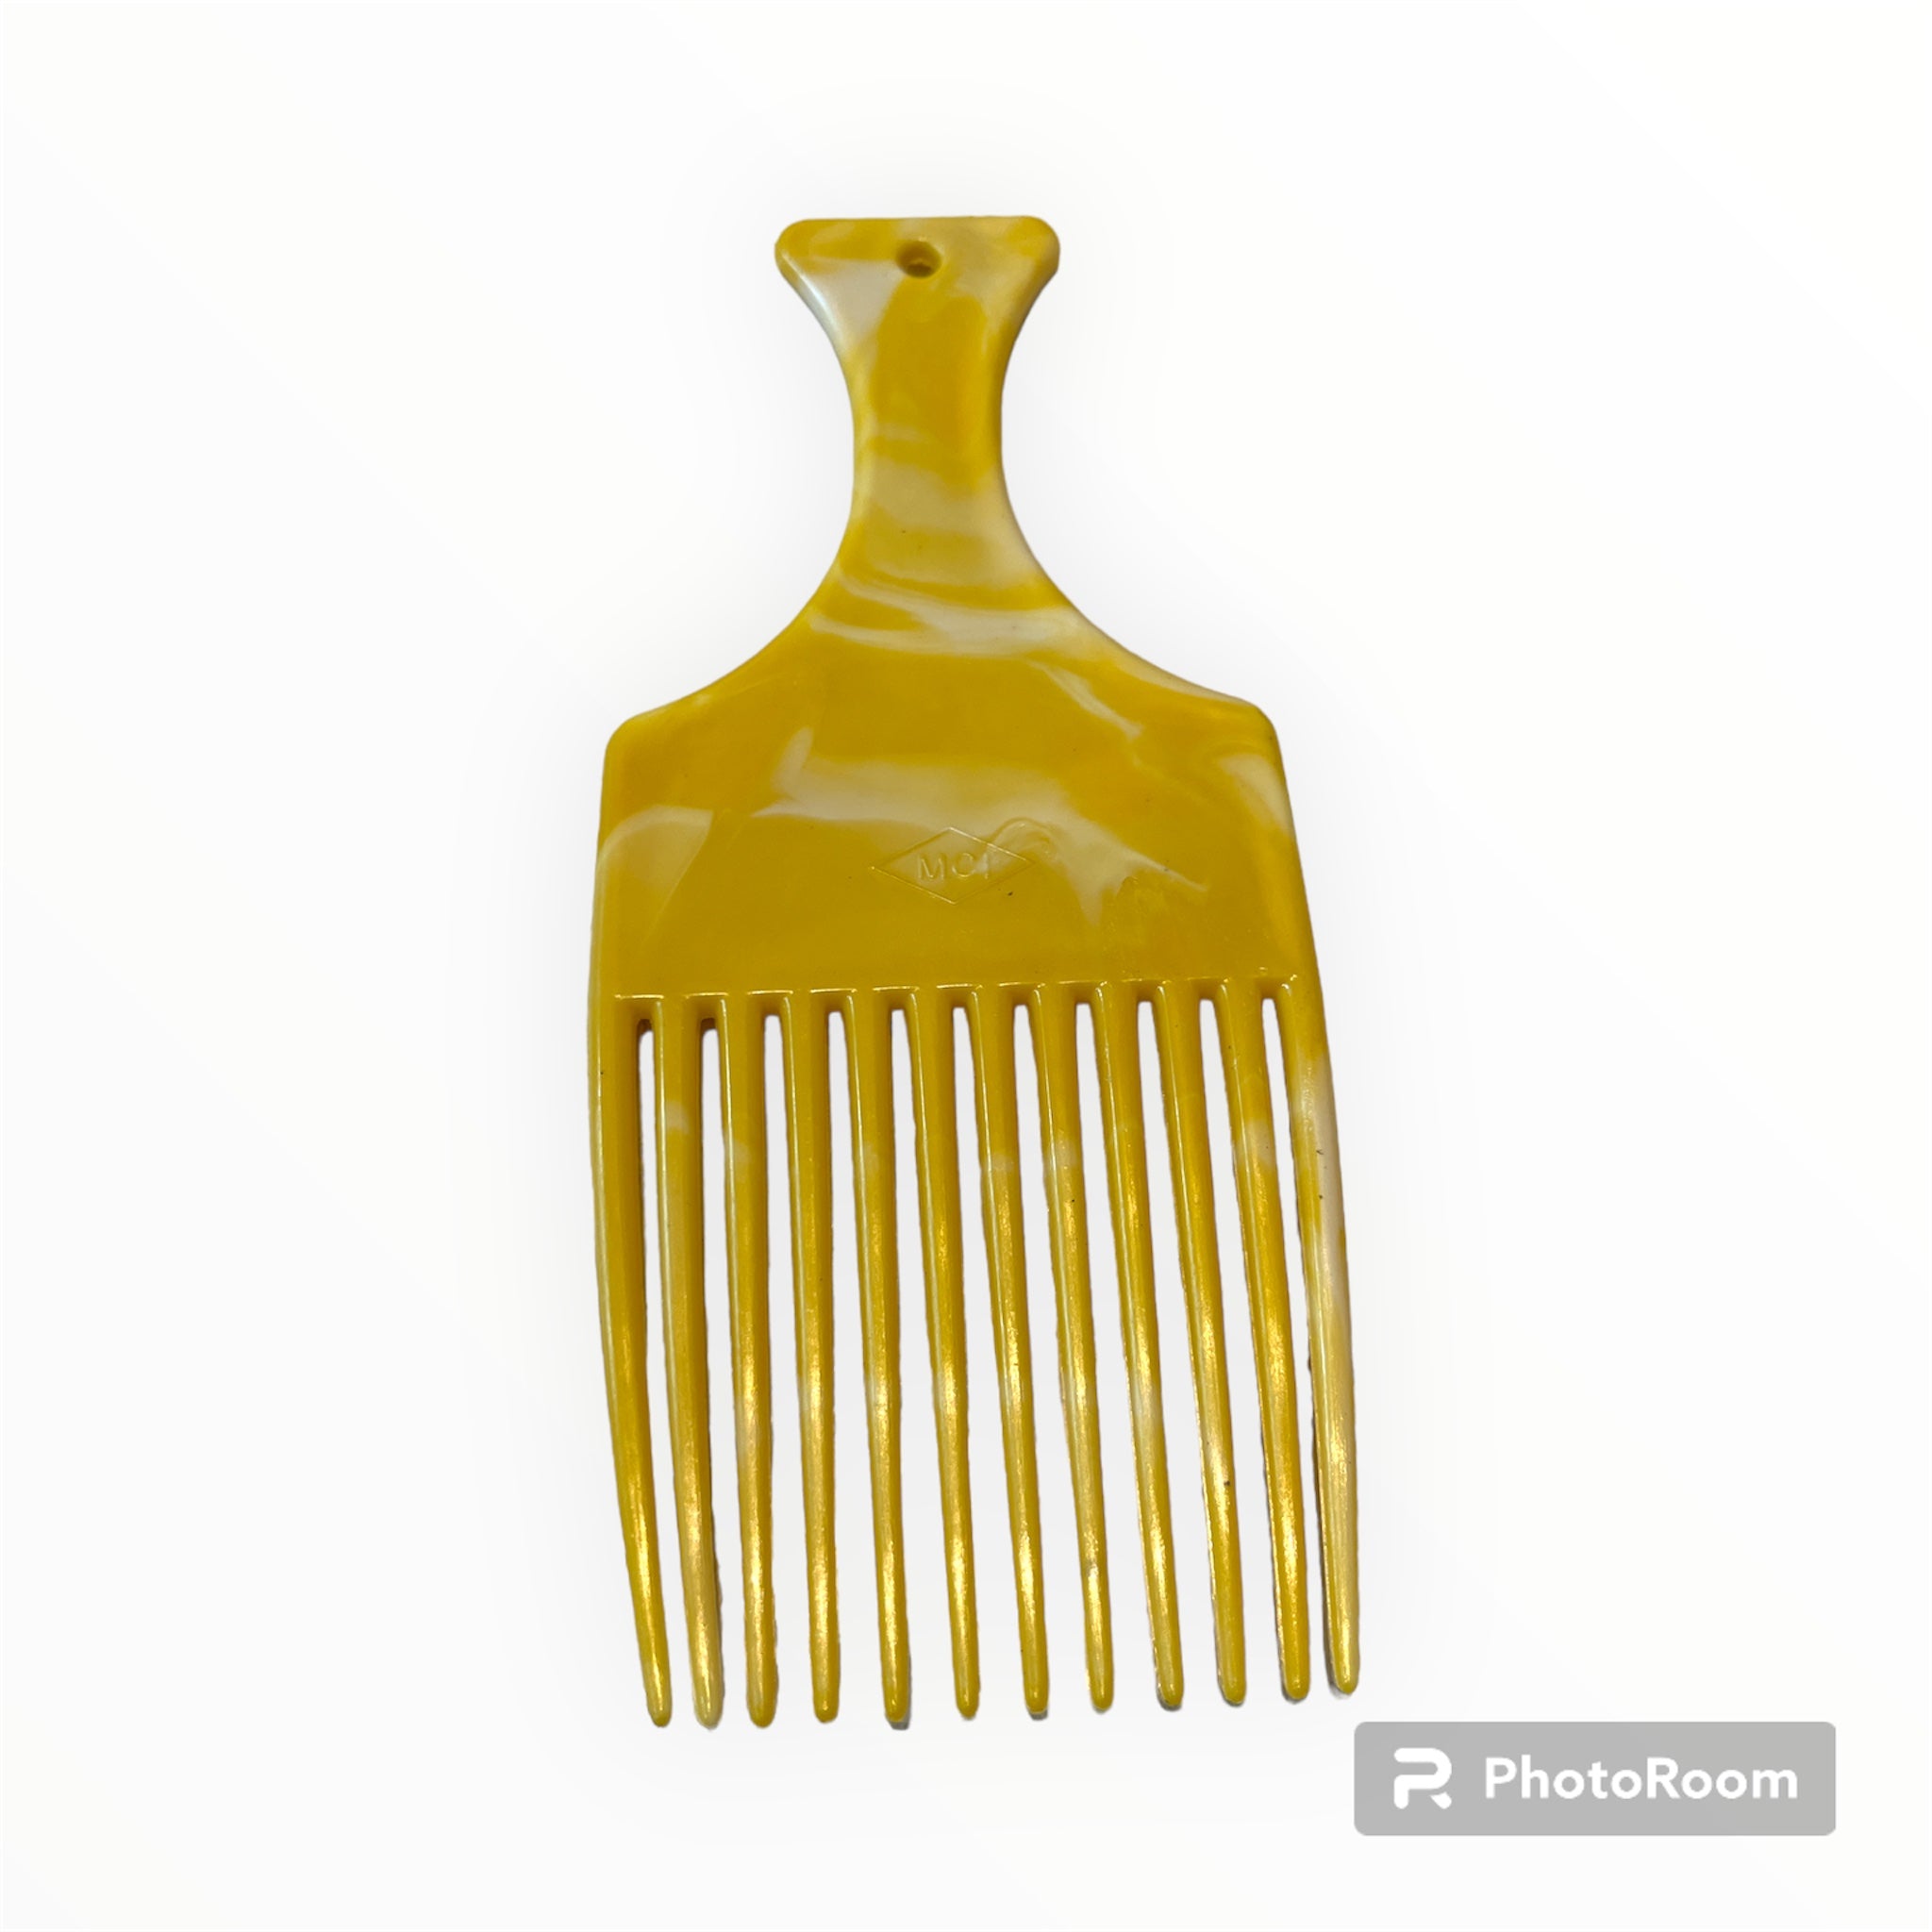 Afro comb